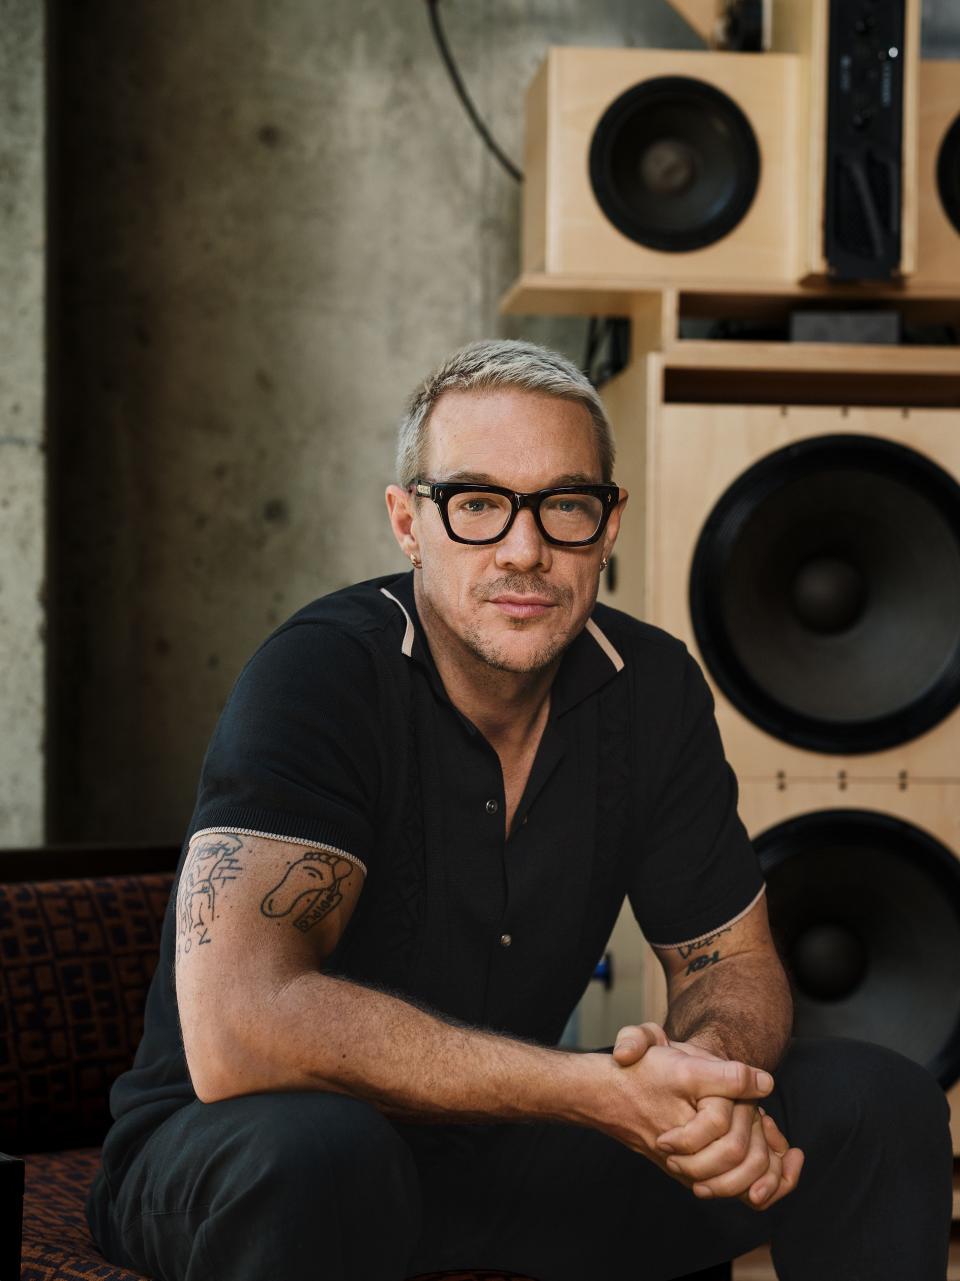 DJ and music producer Diplo chills out in Jamaica.